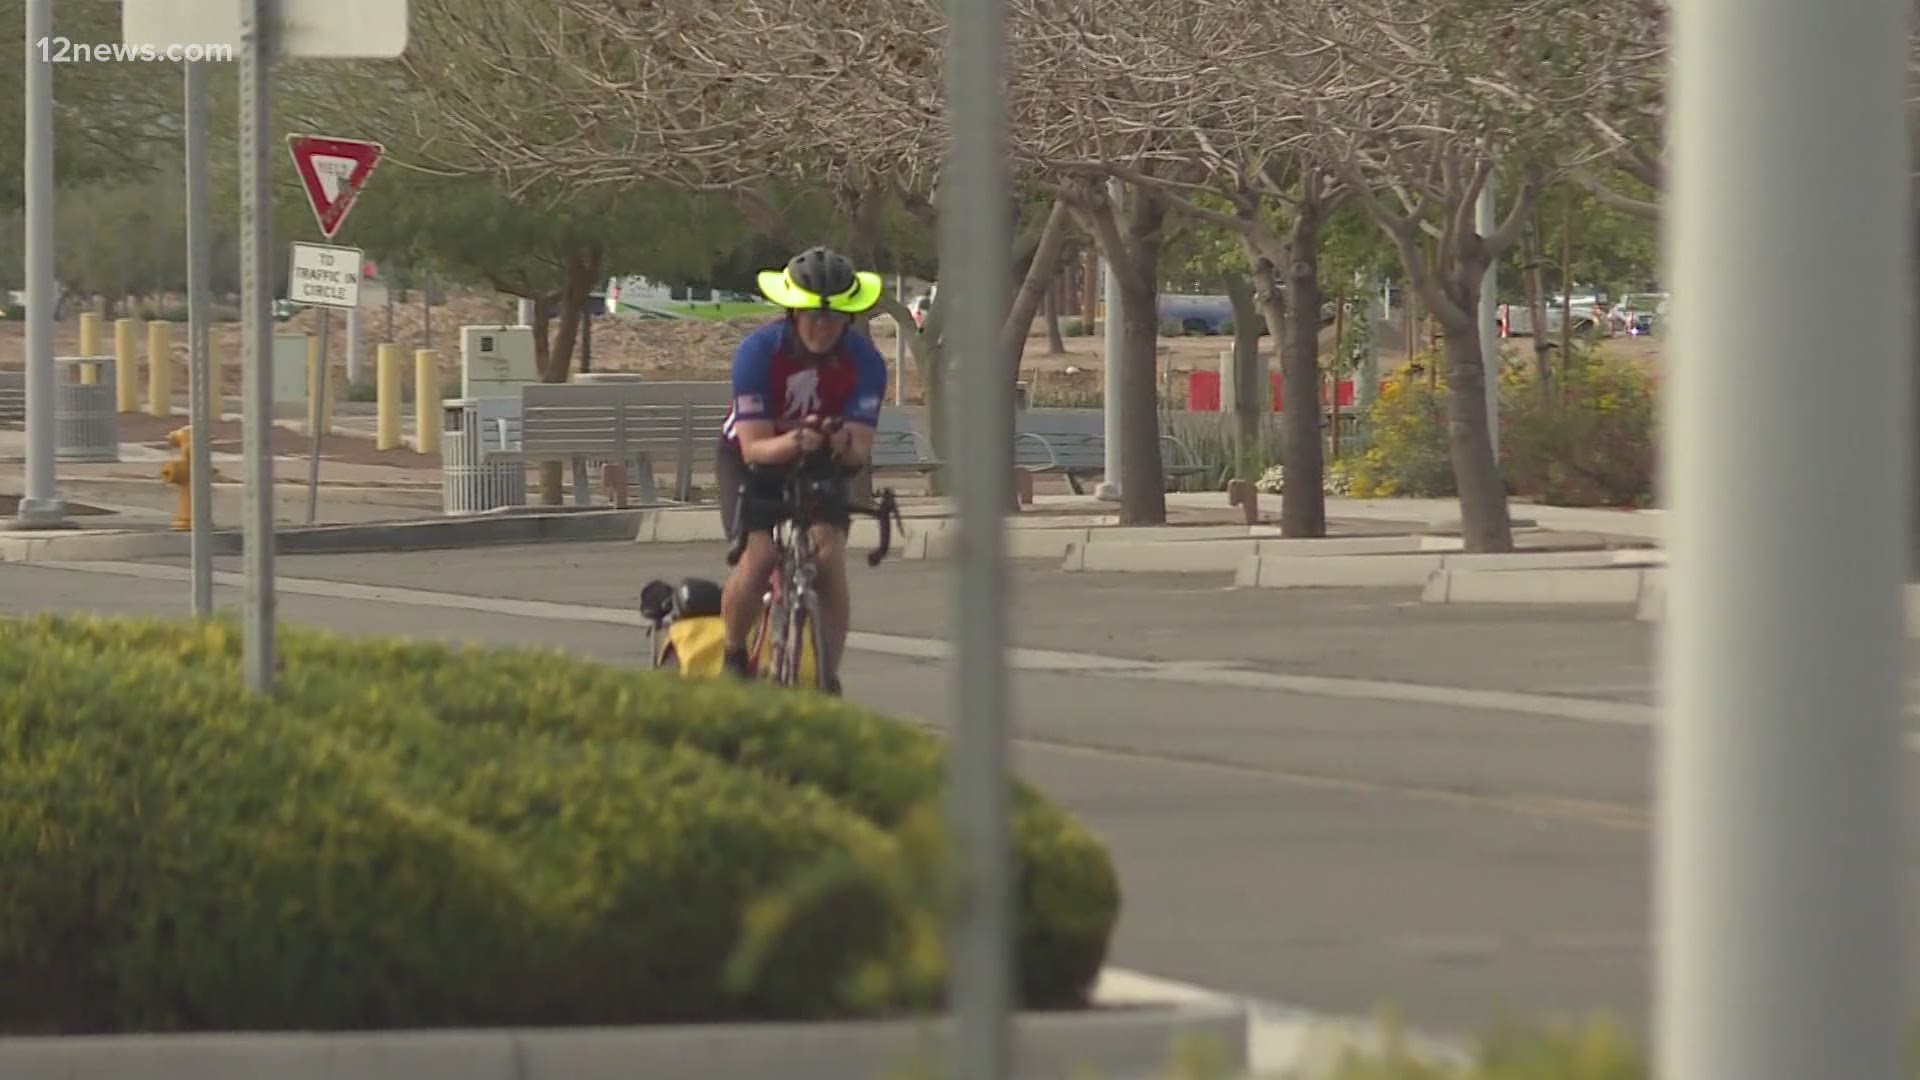 Tempe recently earned the title of safest city to bike ride in Arizona. Jen Wahl shares what the city is doing to protect bicyclists.